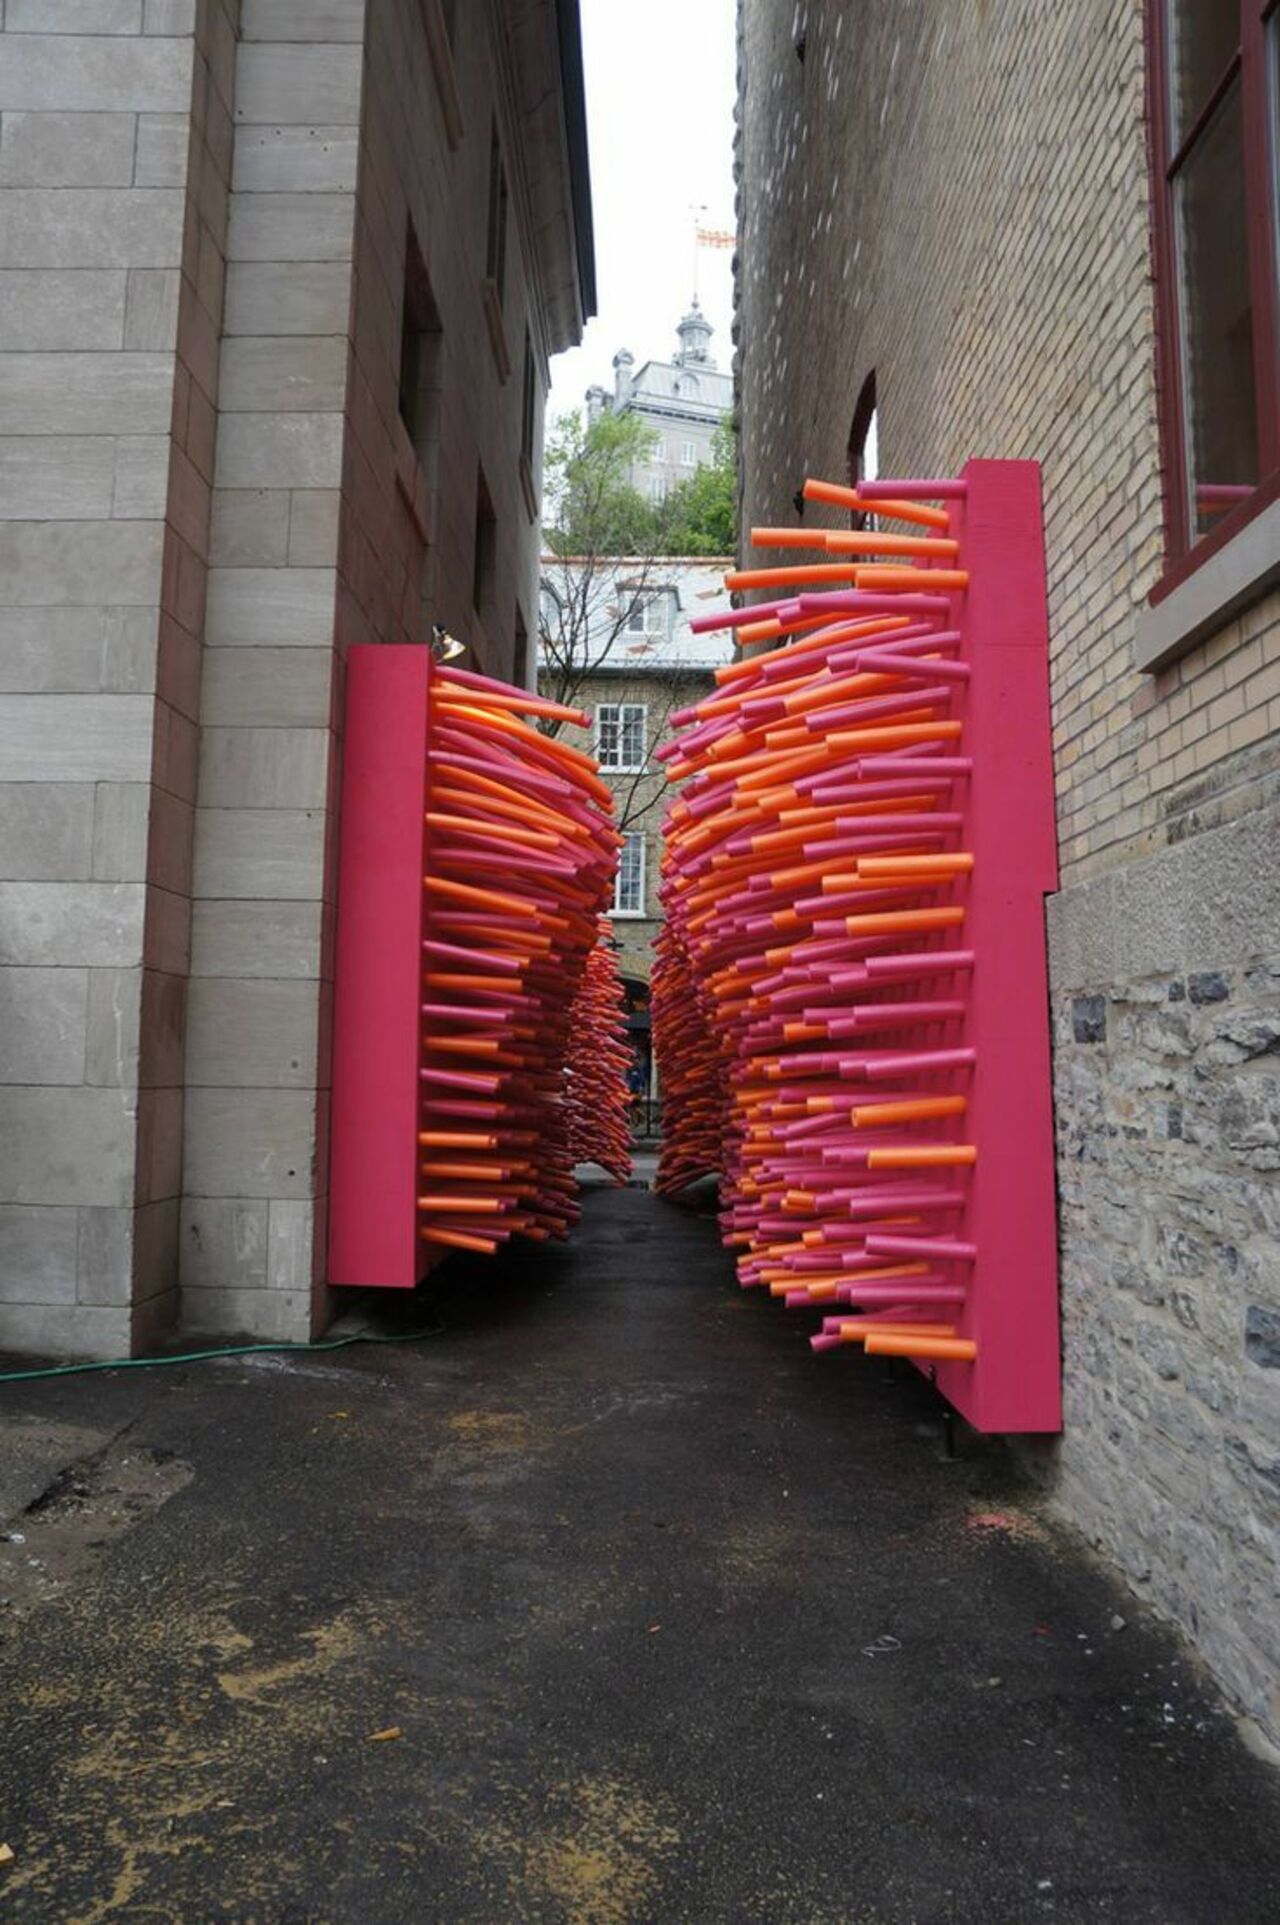 100s of pool noodles invade an abandoned alley in Québec Created by creative collective Les Astronautes#streetart #mural #graffiti #art https://t.co/kEPyouBRvj